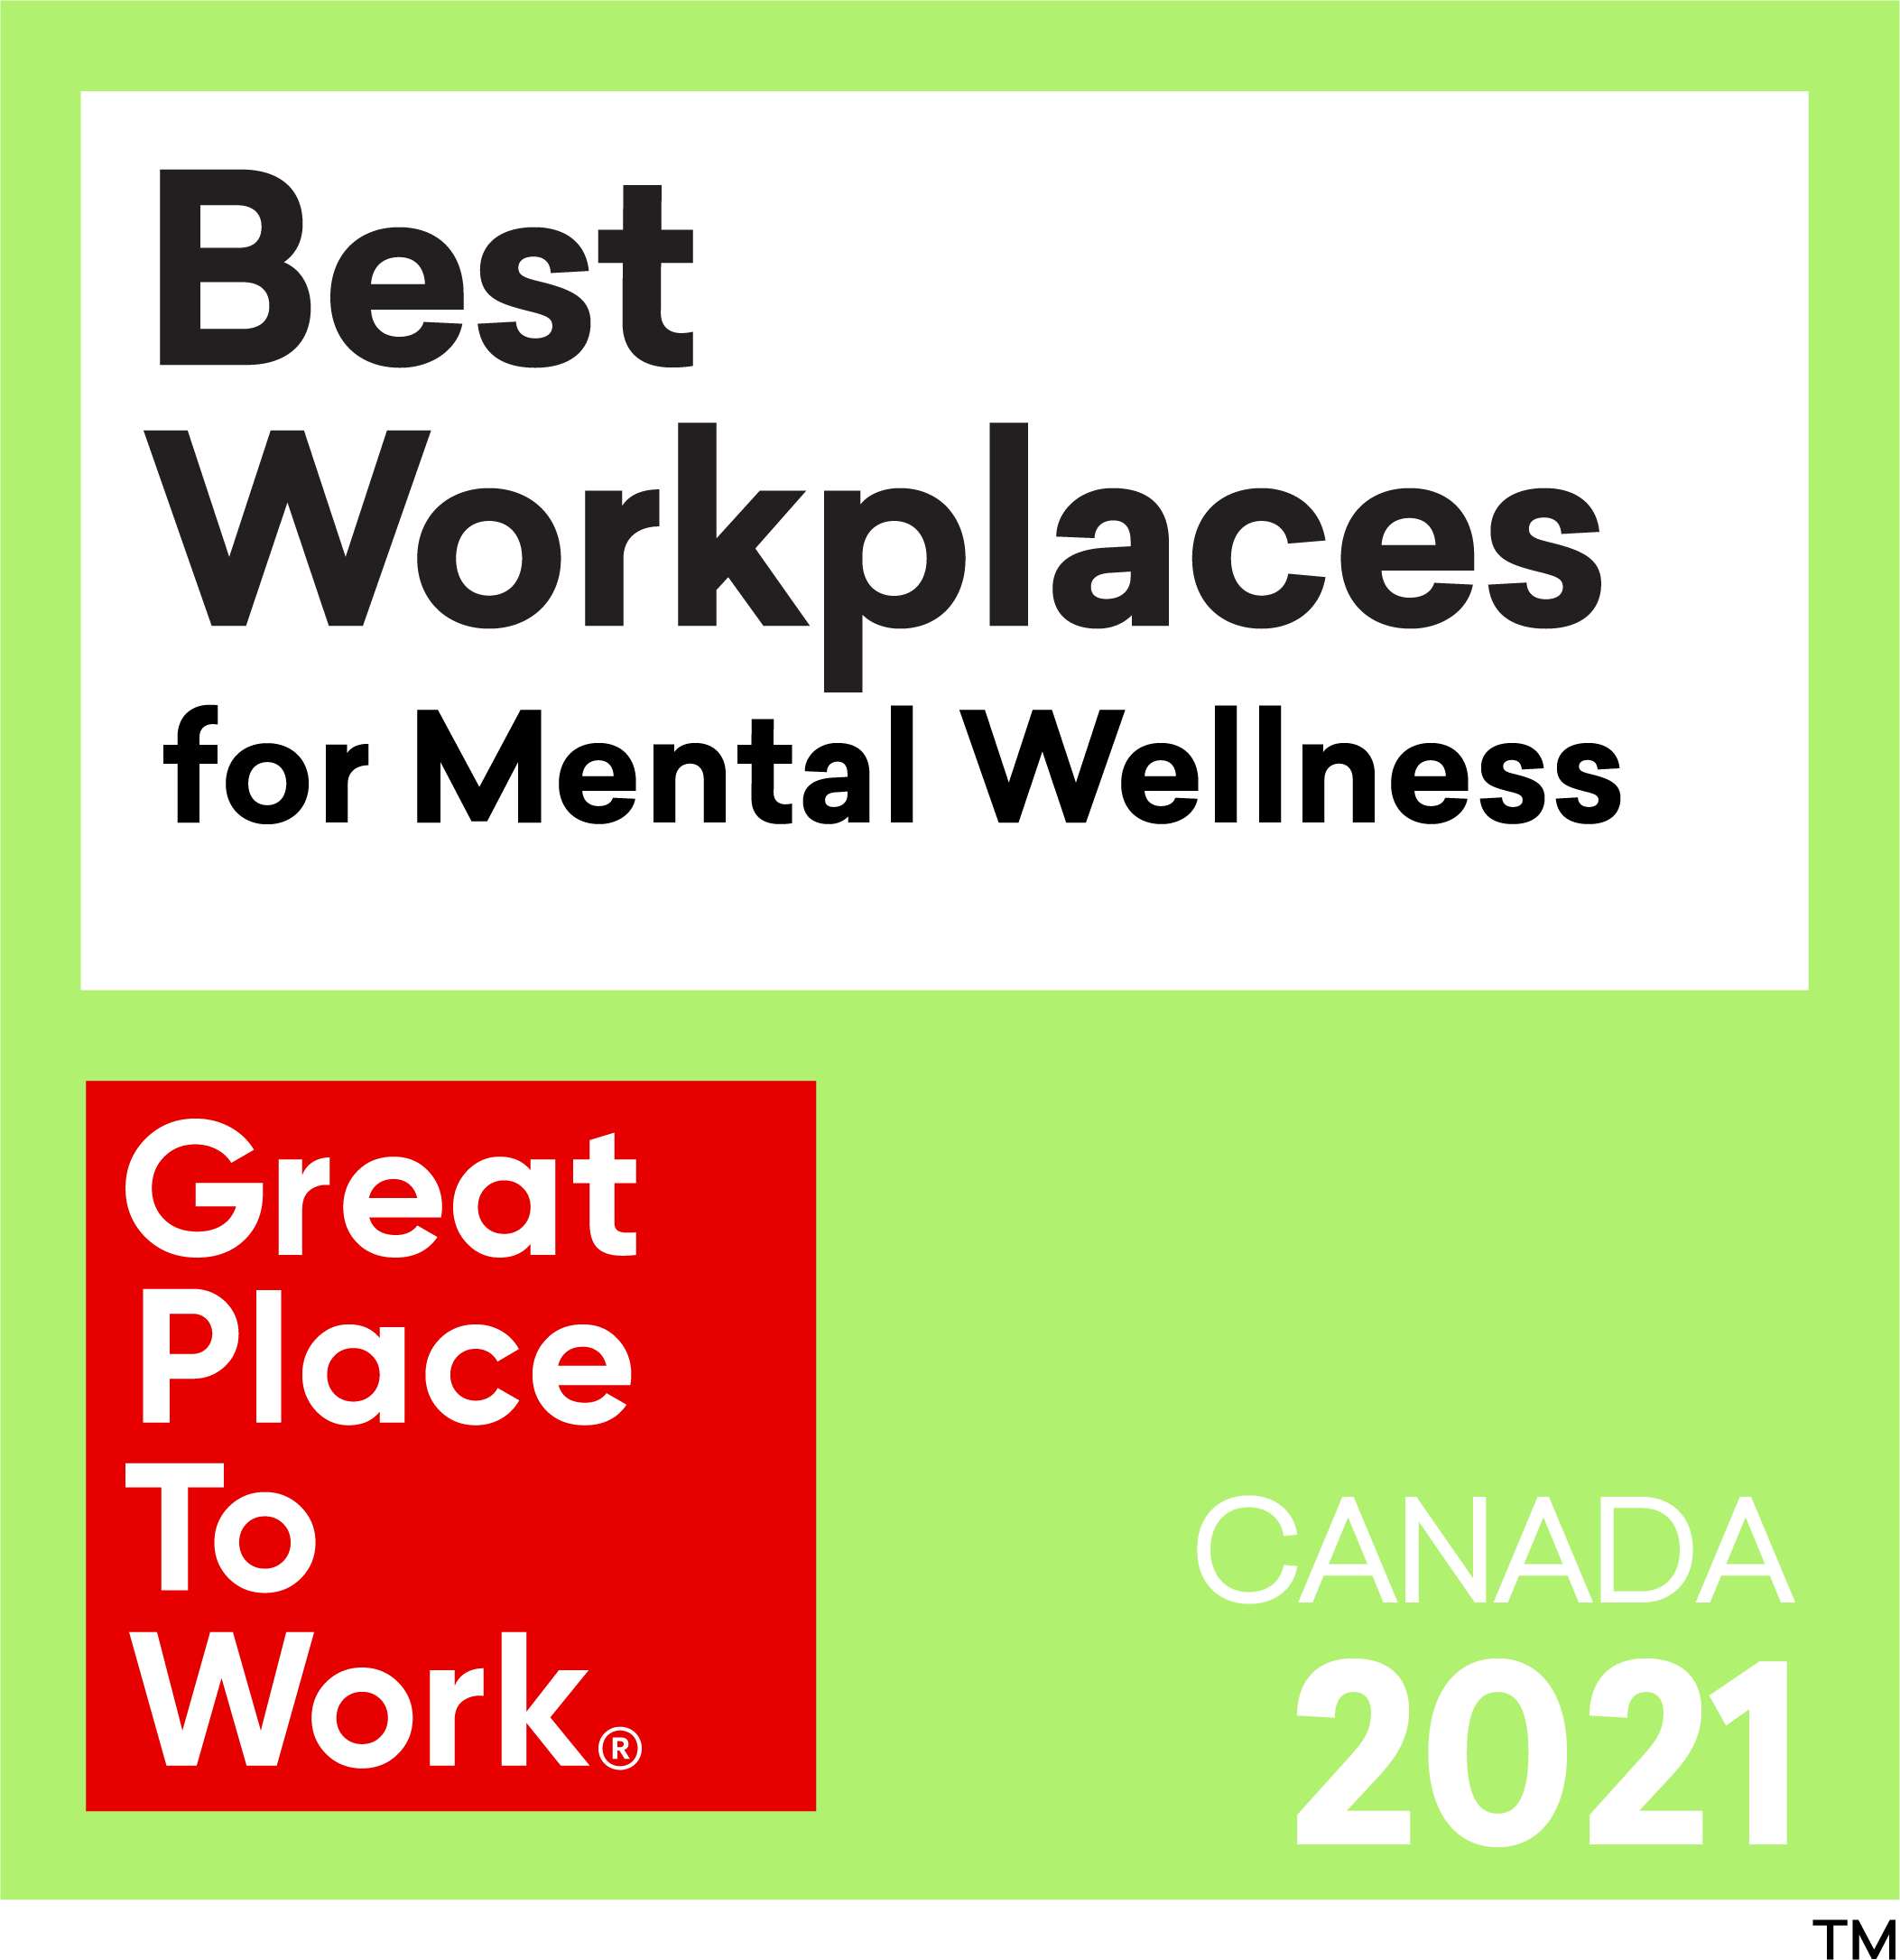 Best Workplaces for Mental Wellness Great Place to Work registered trademark Canada 2020 trademark. Logo.